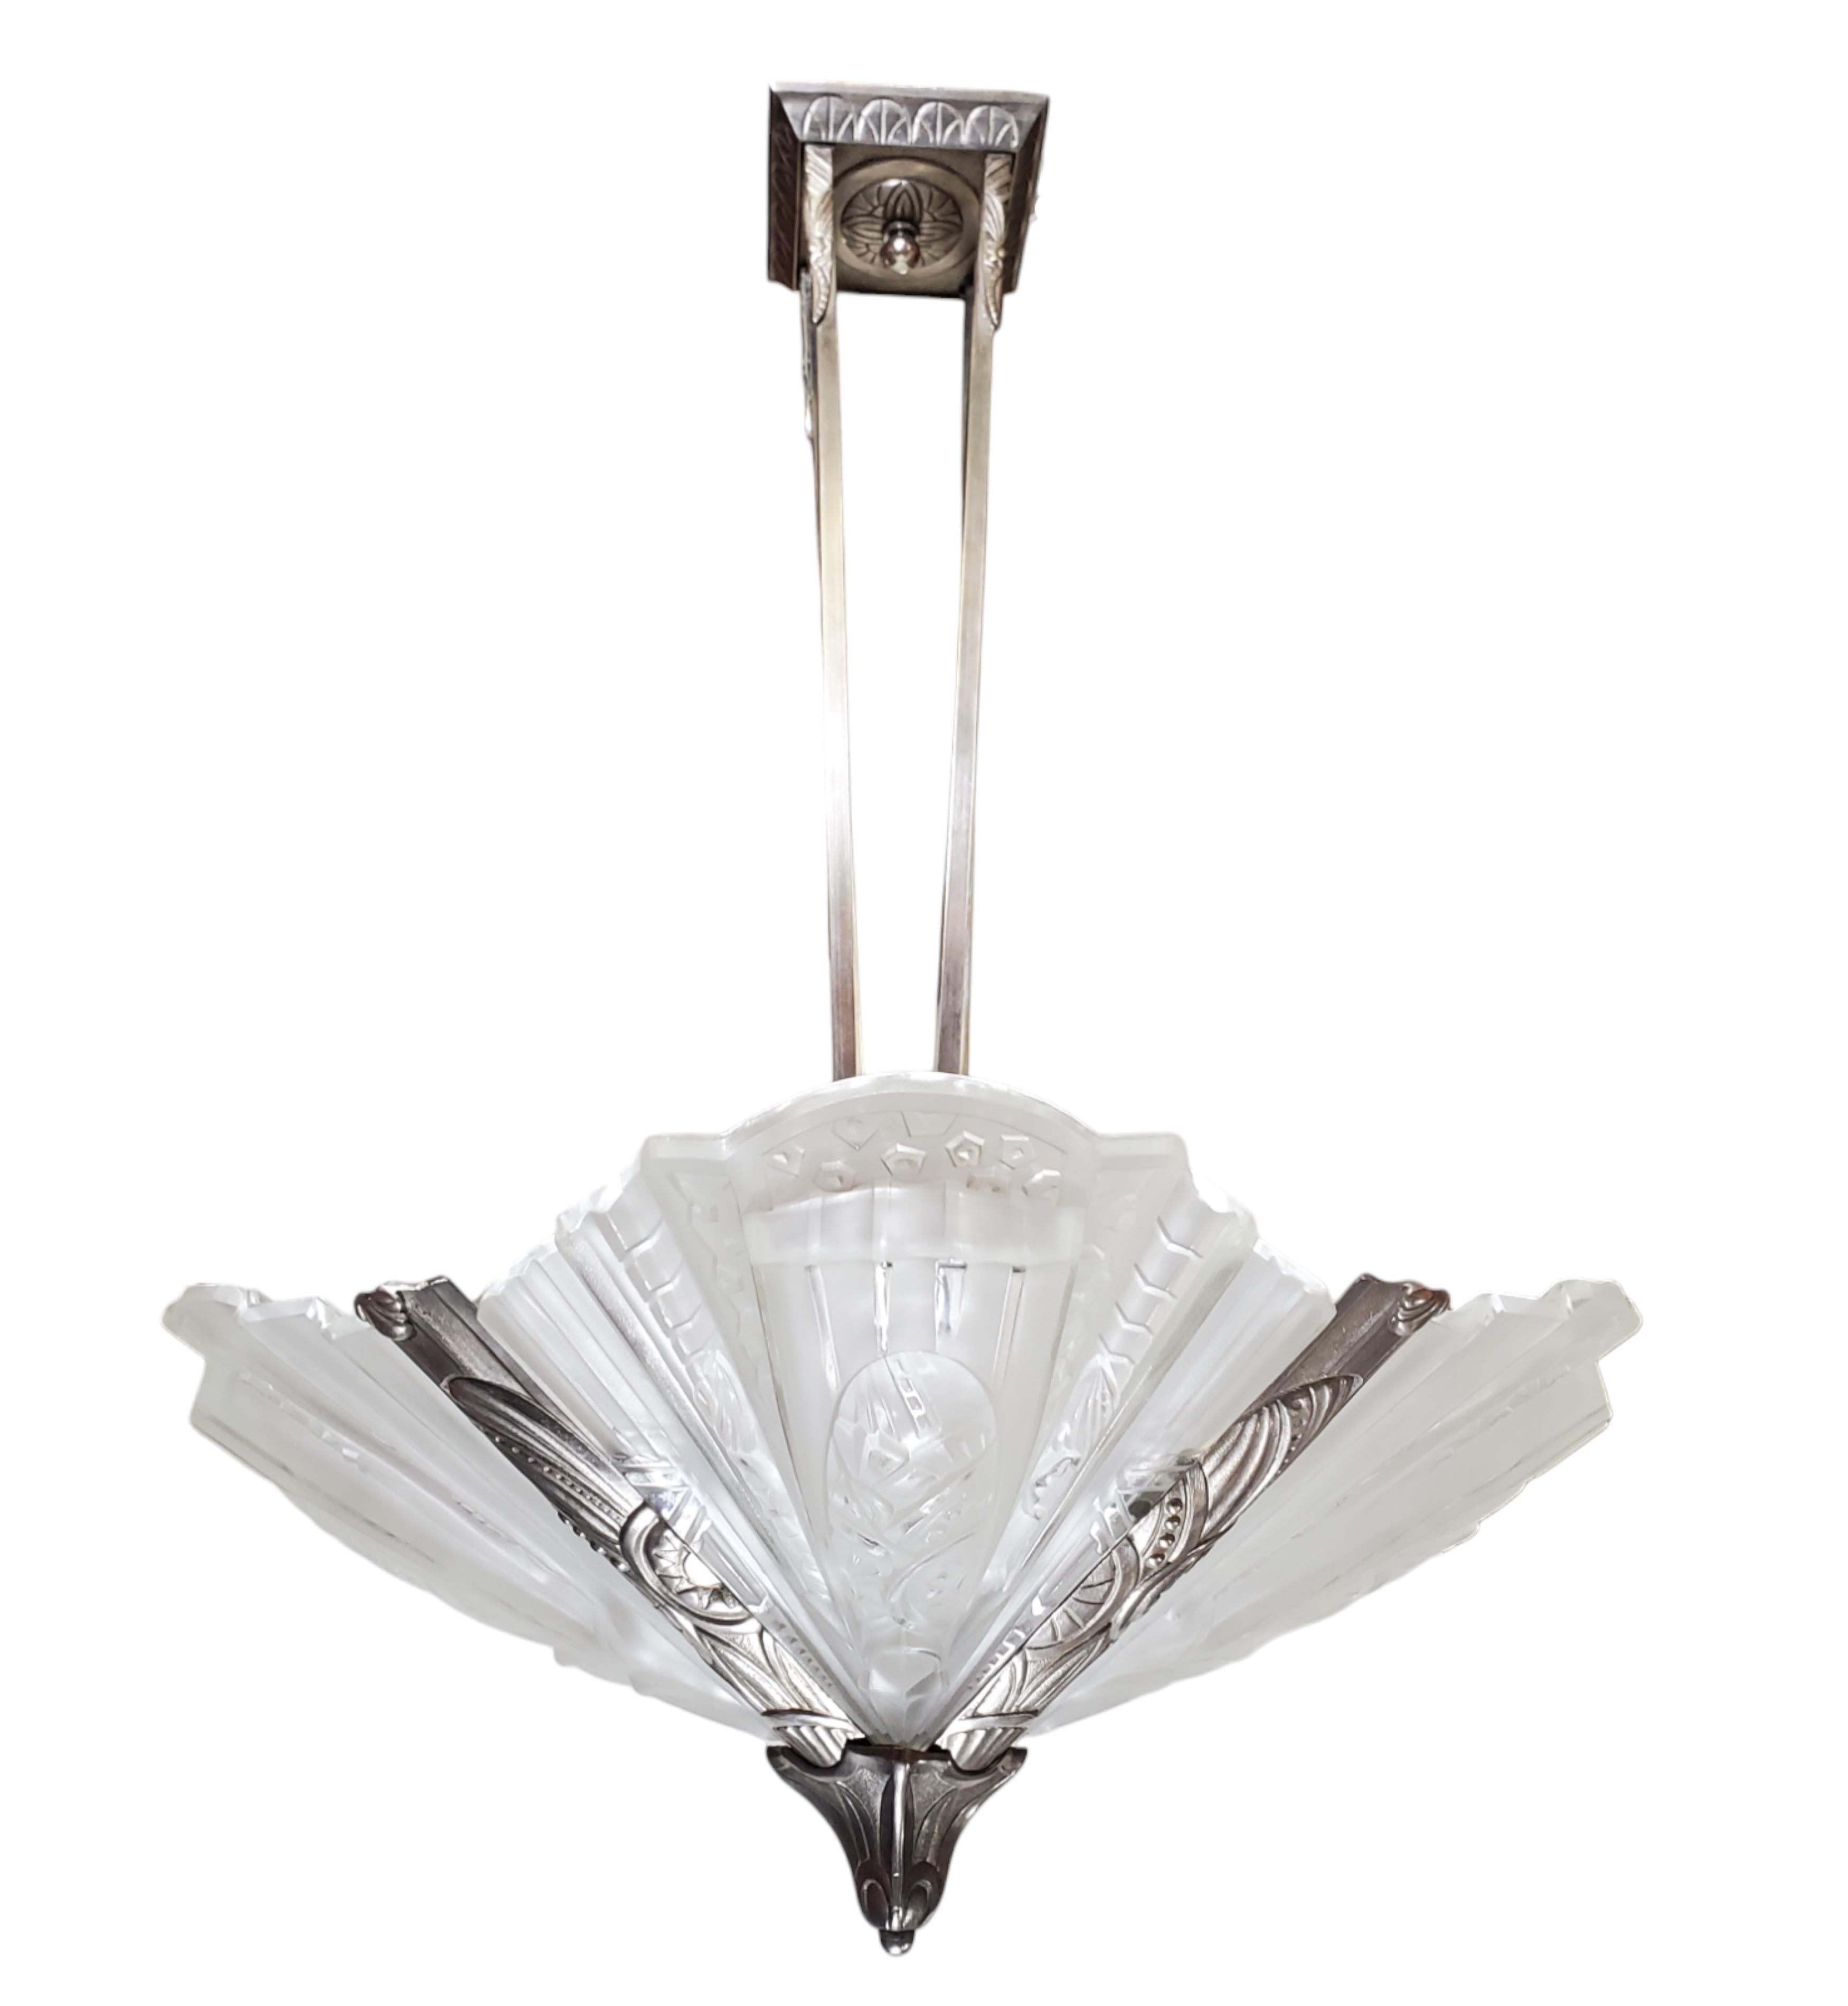 
A fabulous original French Art Deco chandelier with four large and bulbous fan shaped geometric motif frosted art glass panels, mounted in its matching motif decorative nickeled bronze frame; signed Frontisi 
The stepped and fluted architectural